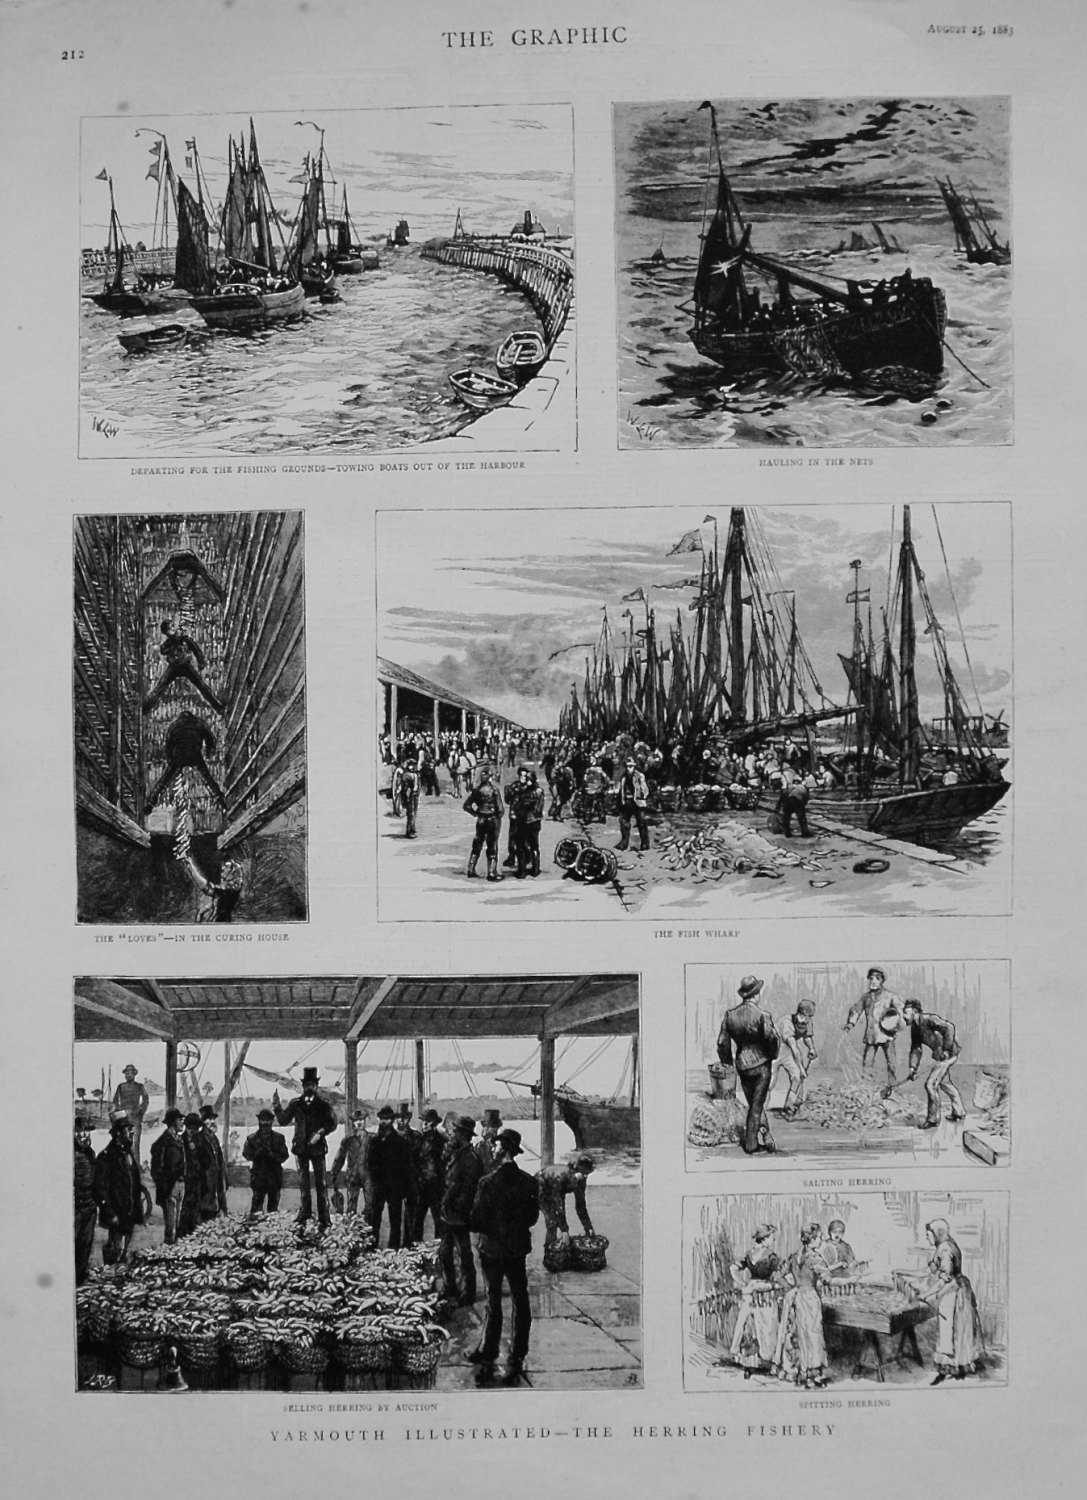 Yarmouth Illustrated - The Herring Fishery. 1883.